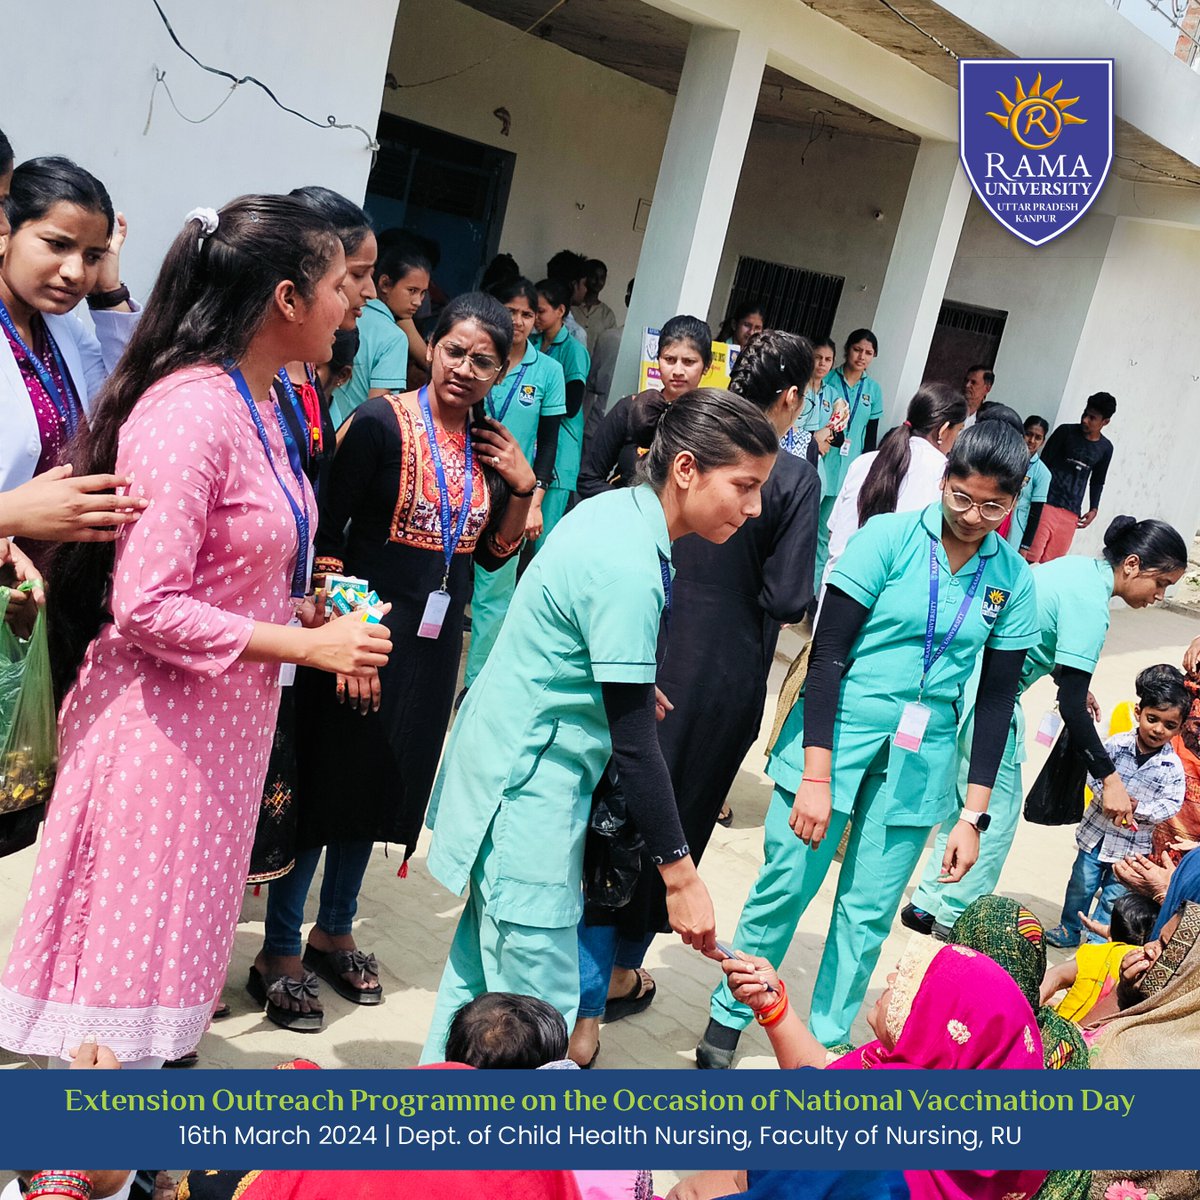 💉The Department of Child Health Nursing at Rama University, organized an outreach program on National Vaccination Day. Let's protect lives together!🌟 #VaccinesWork #PublicHealth #HealthForAll #Nursing #RamaUniversity #Kanpur #ChildHealth #NationalVaccinationDay #StayHealthy